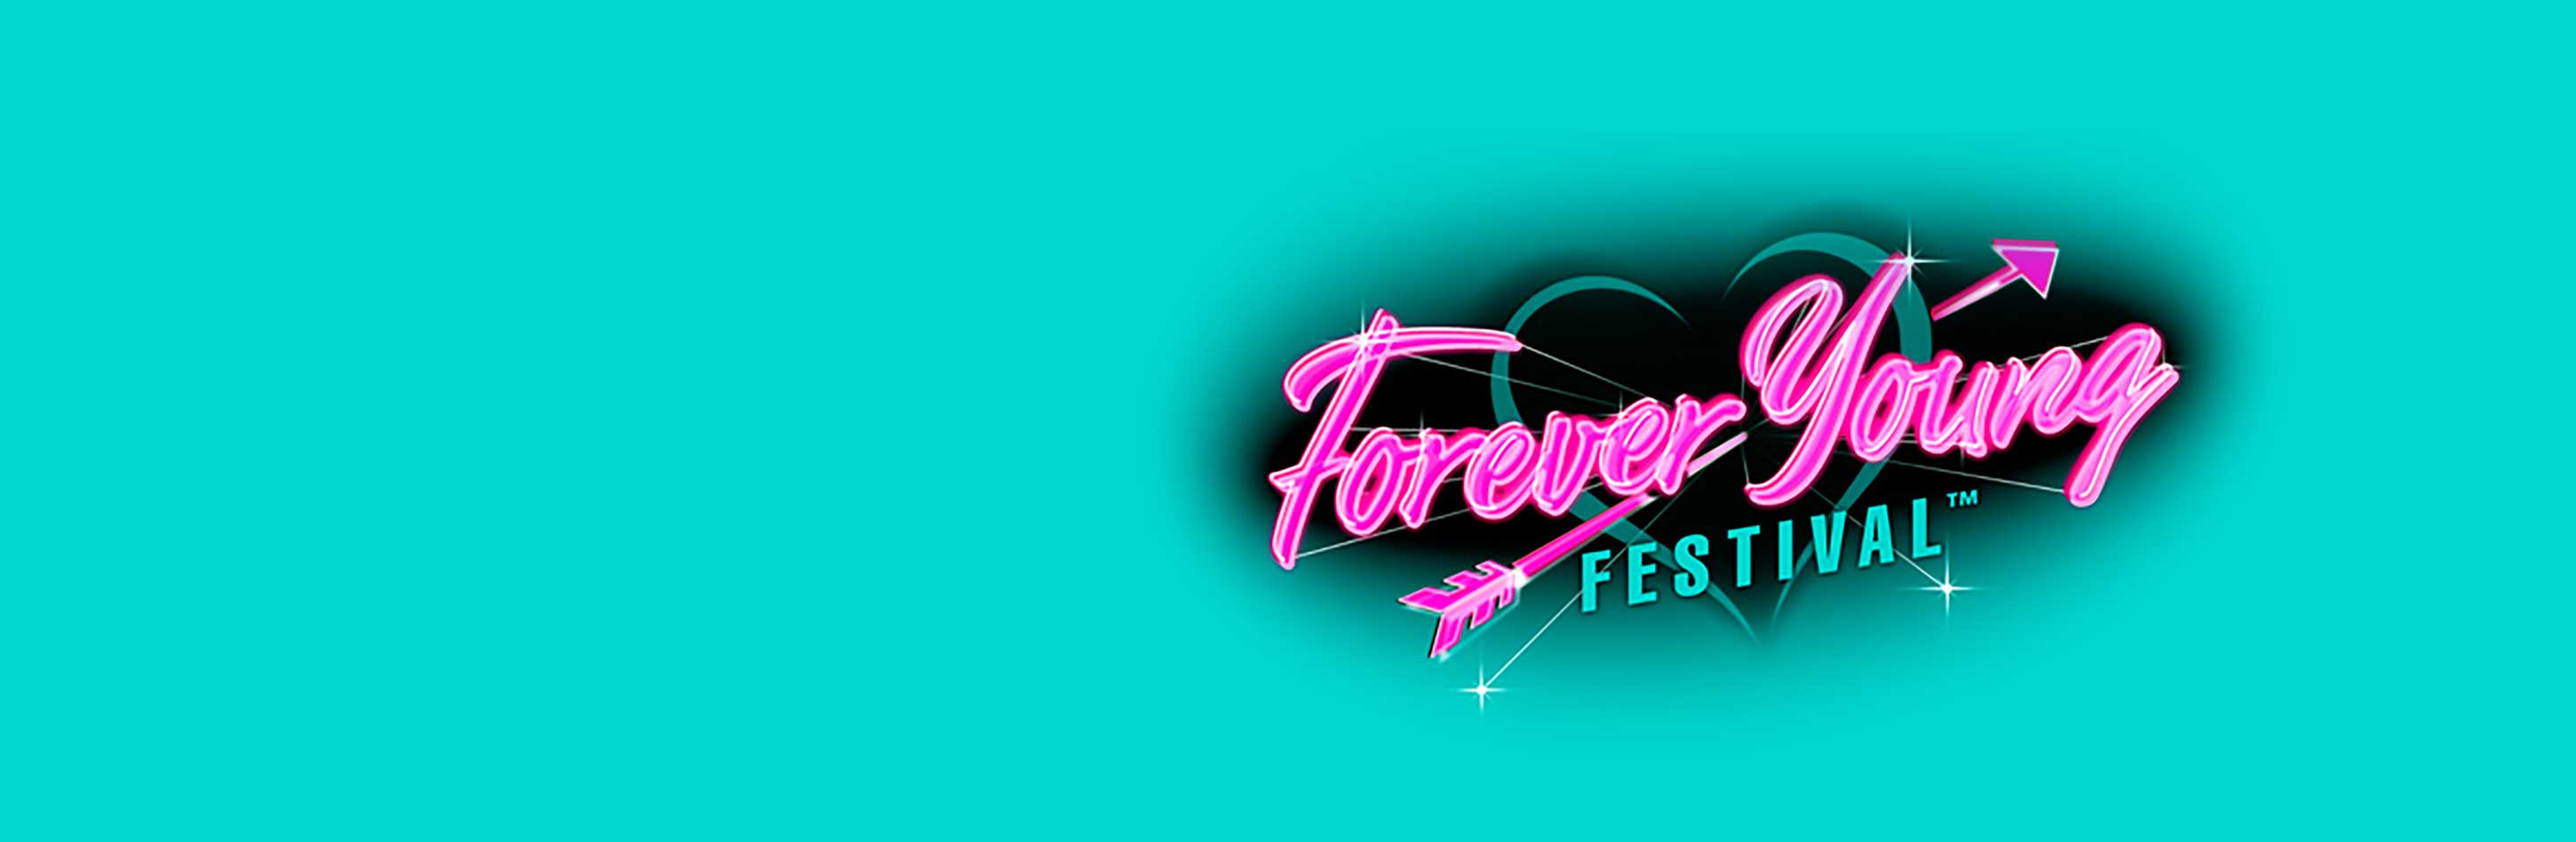 Holly headlining Sunday night Forever Young Festival